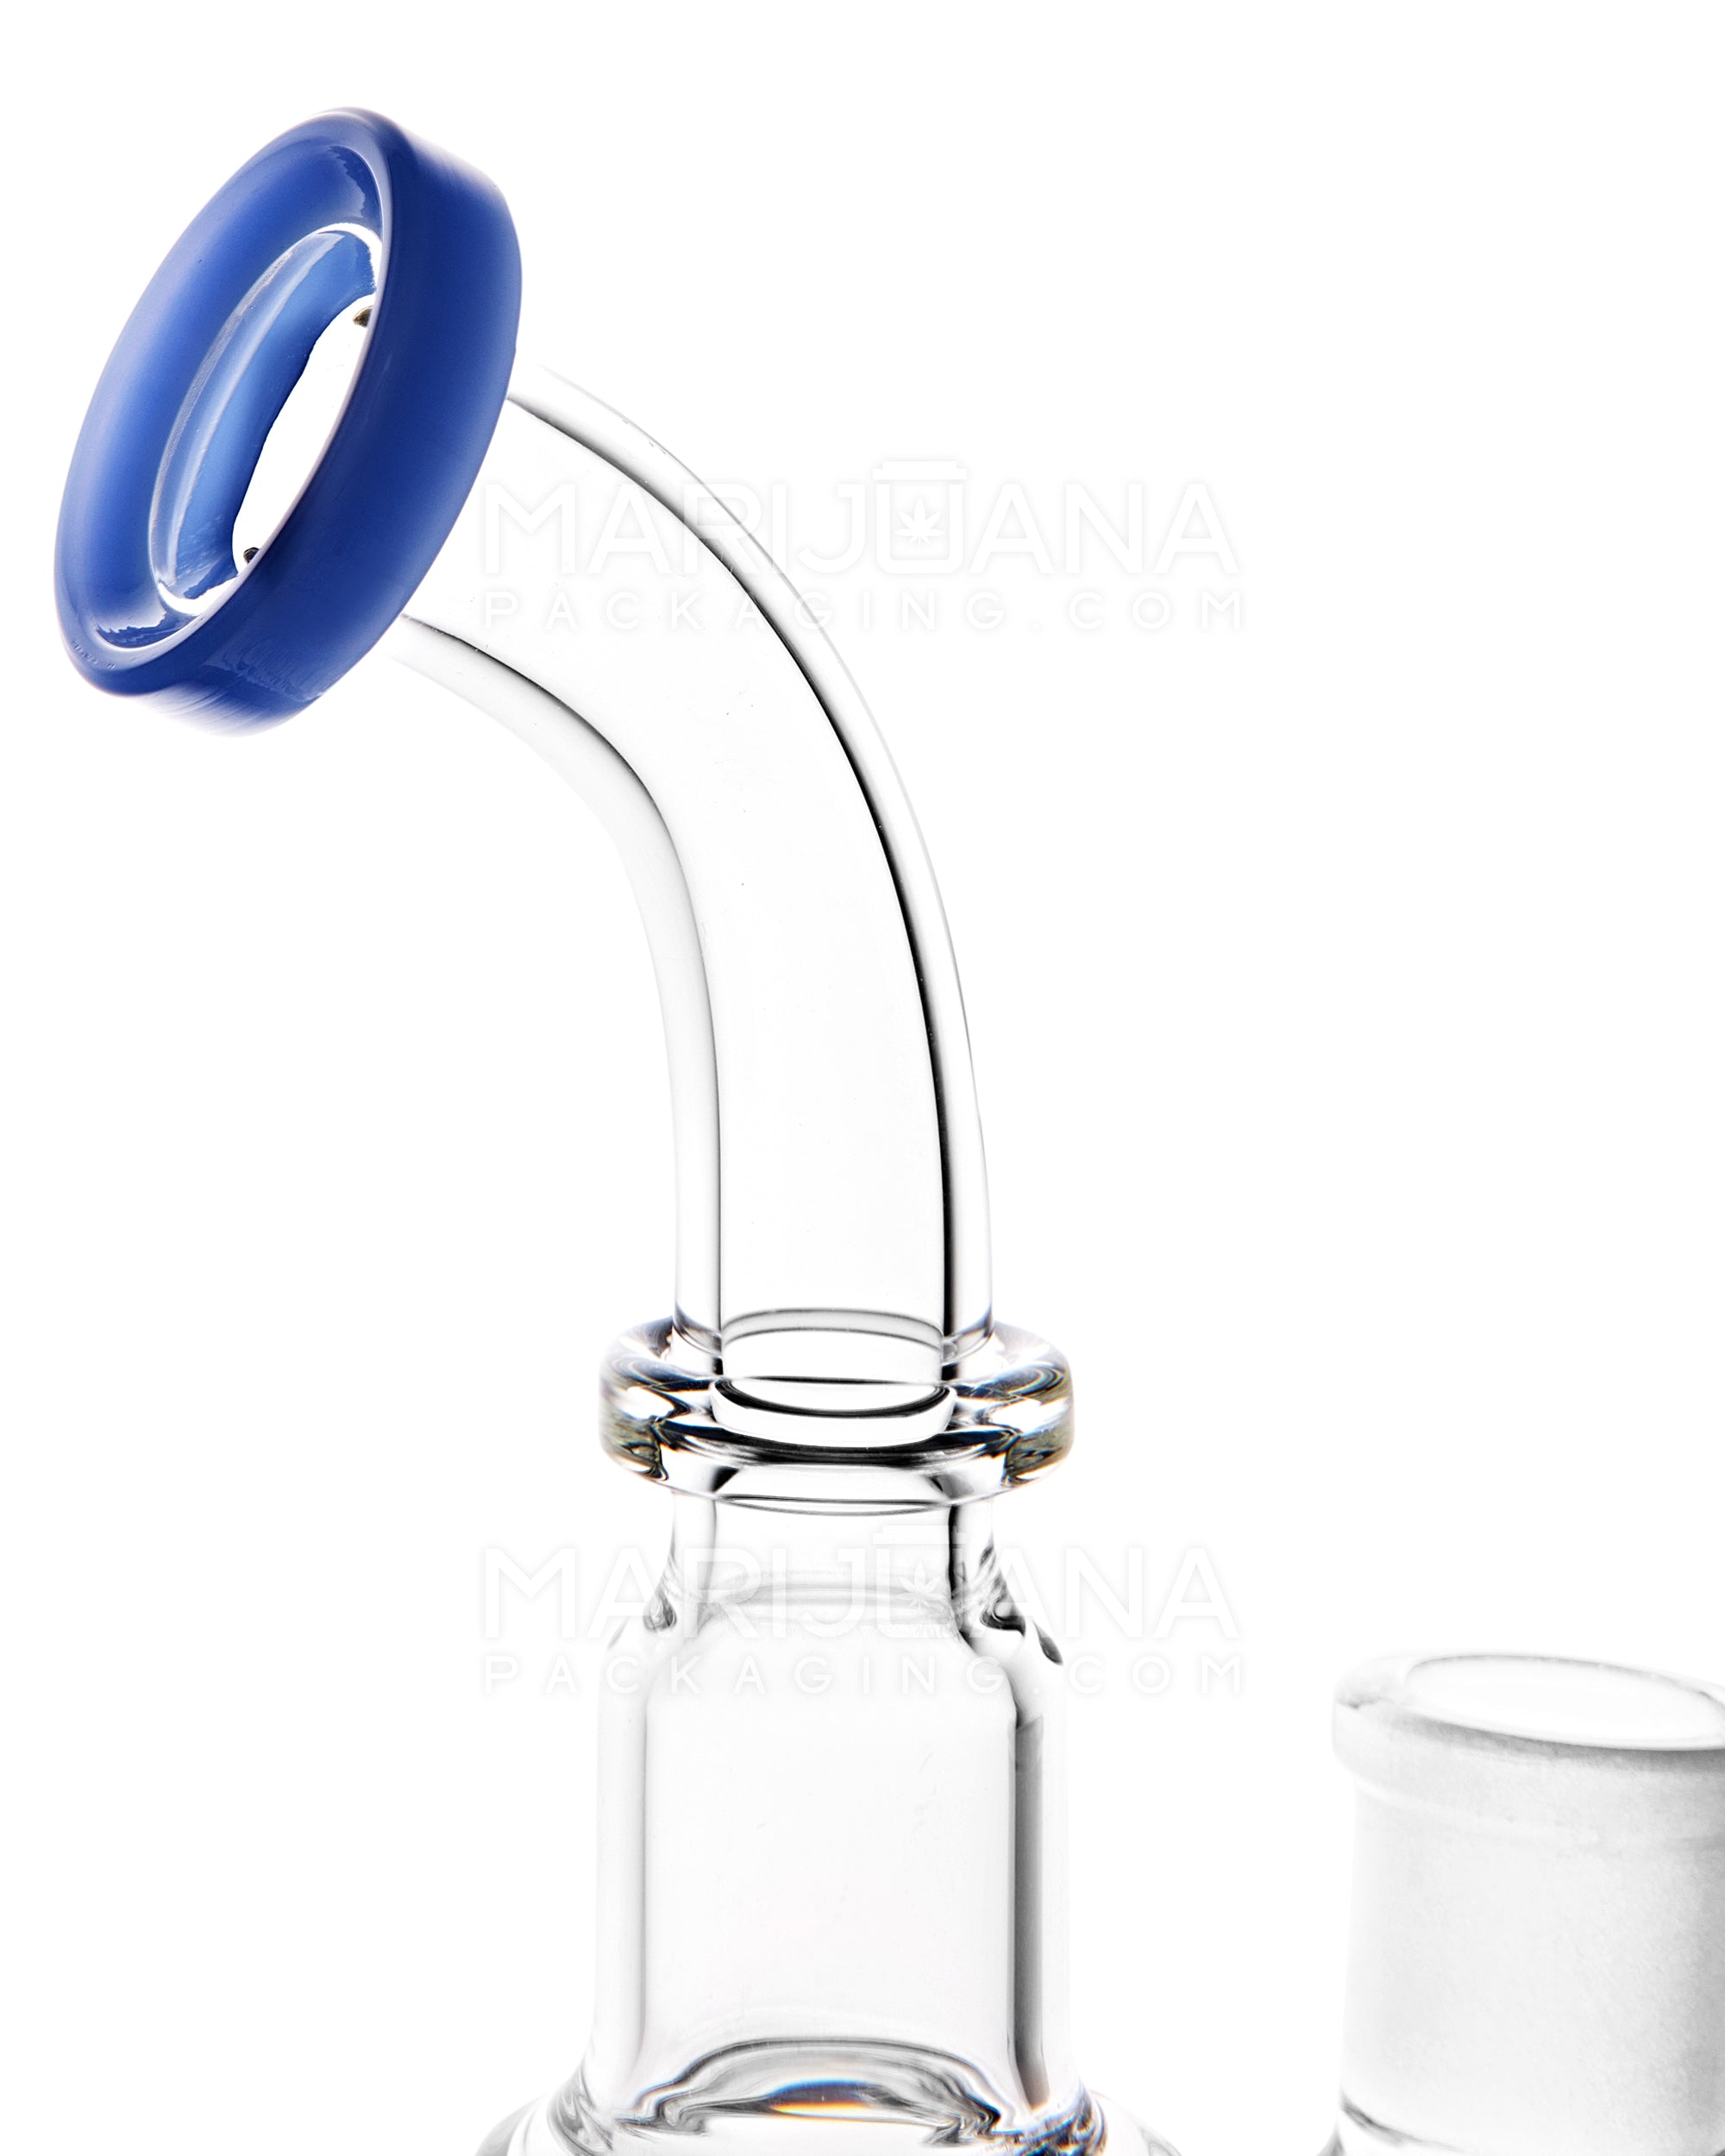 Bent Neck Showerhead Perc Glass Water Pipe w/ Thick Base | 9in Tall - 18mm Bowl - Blue - 4